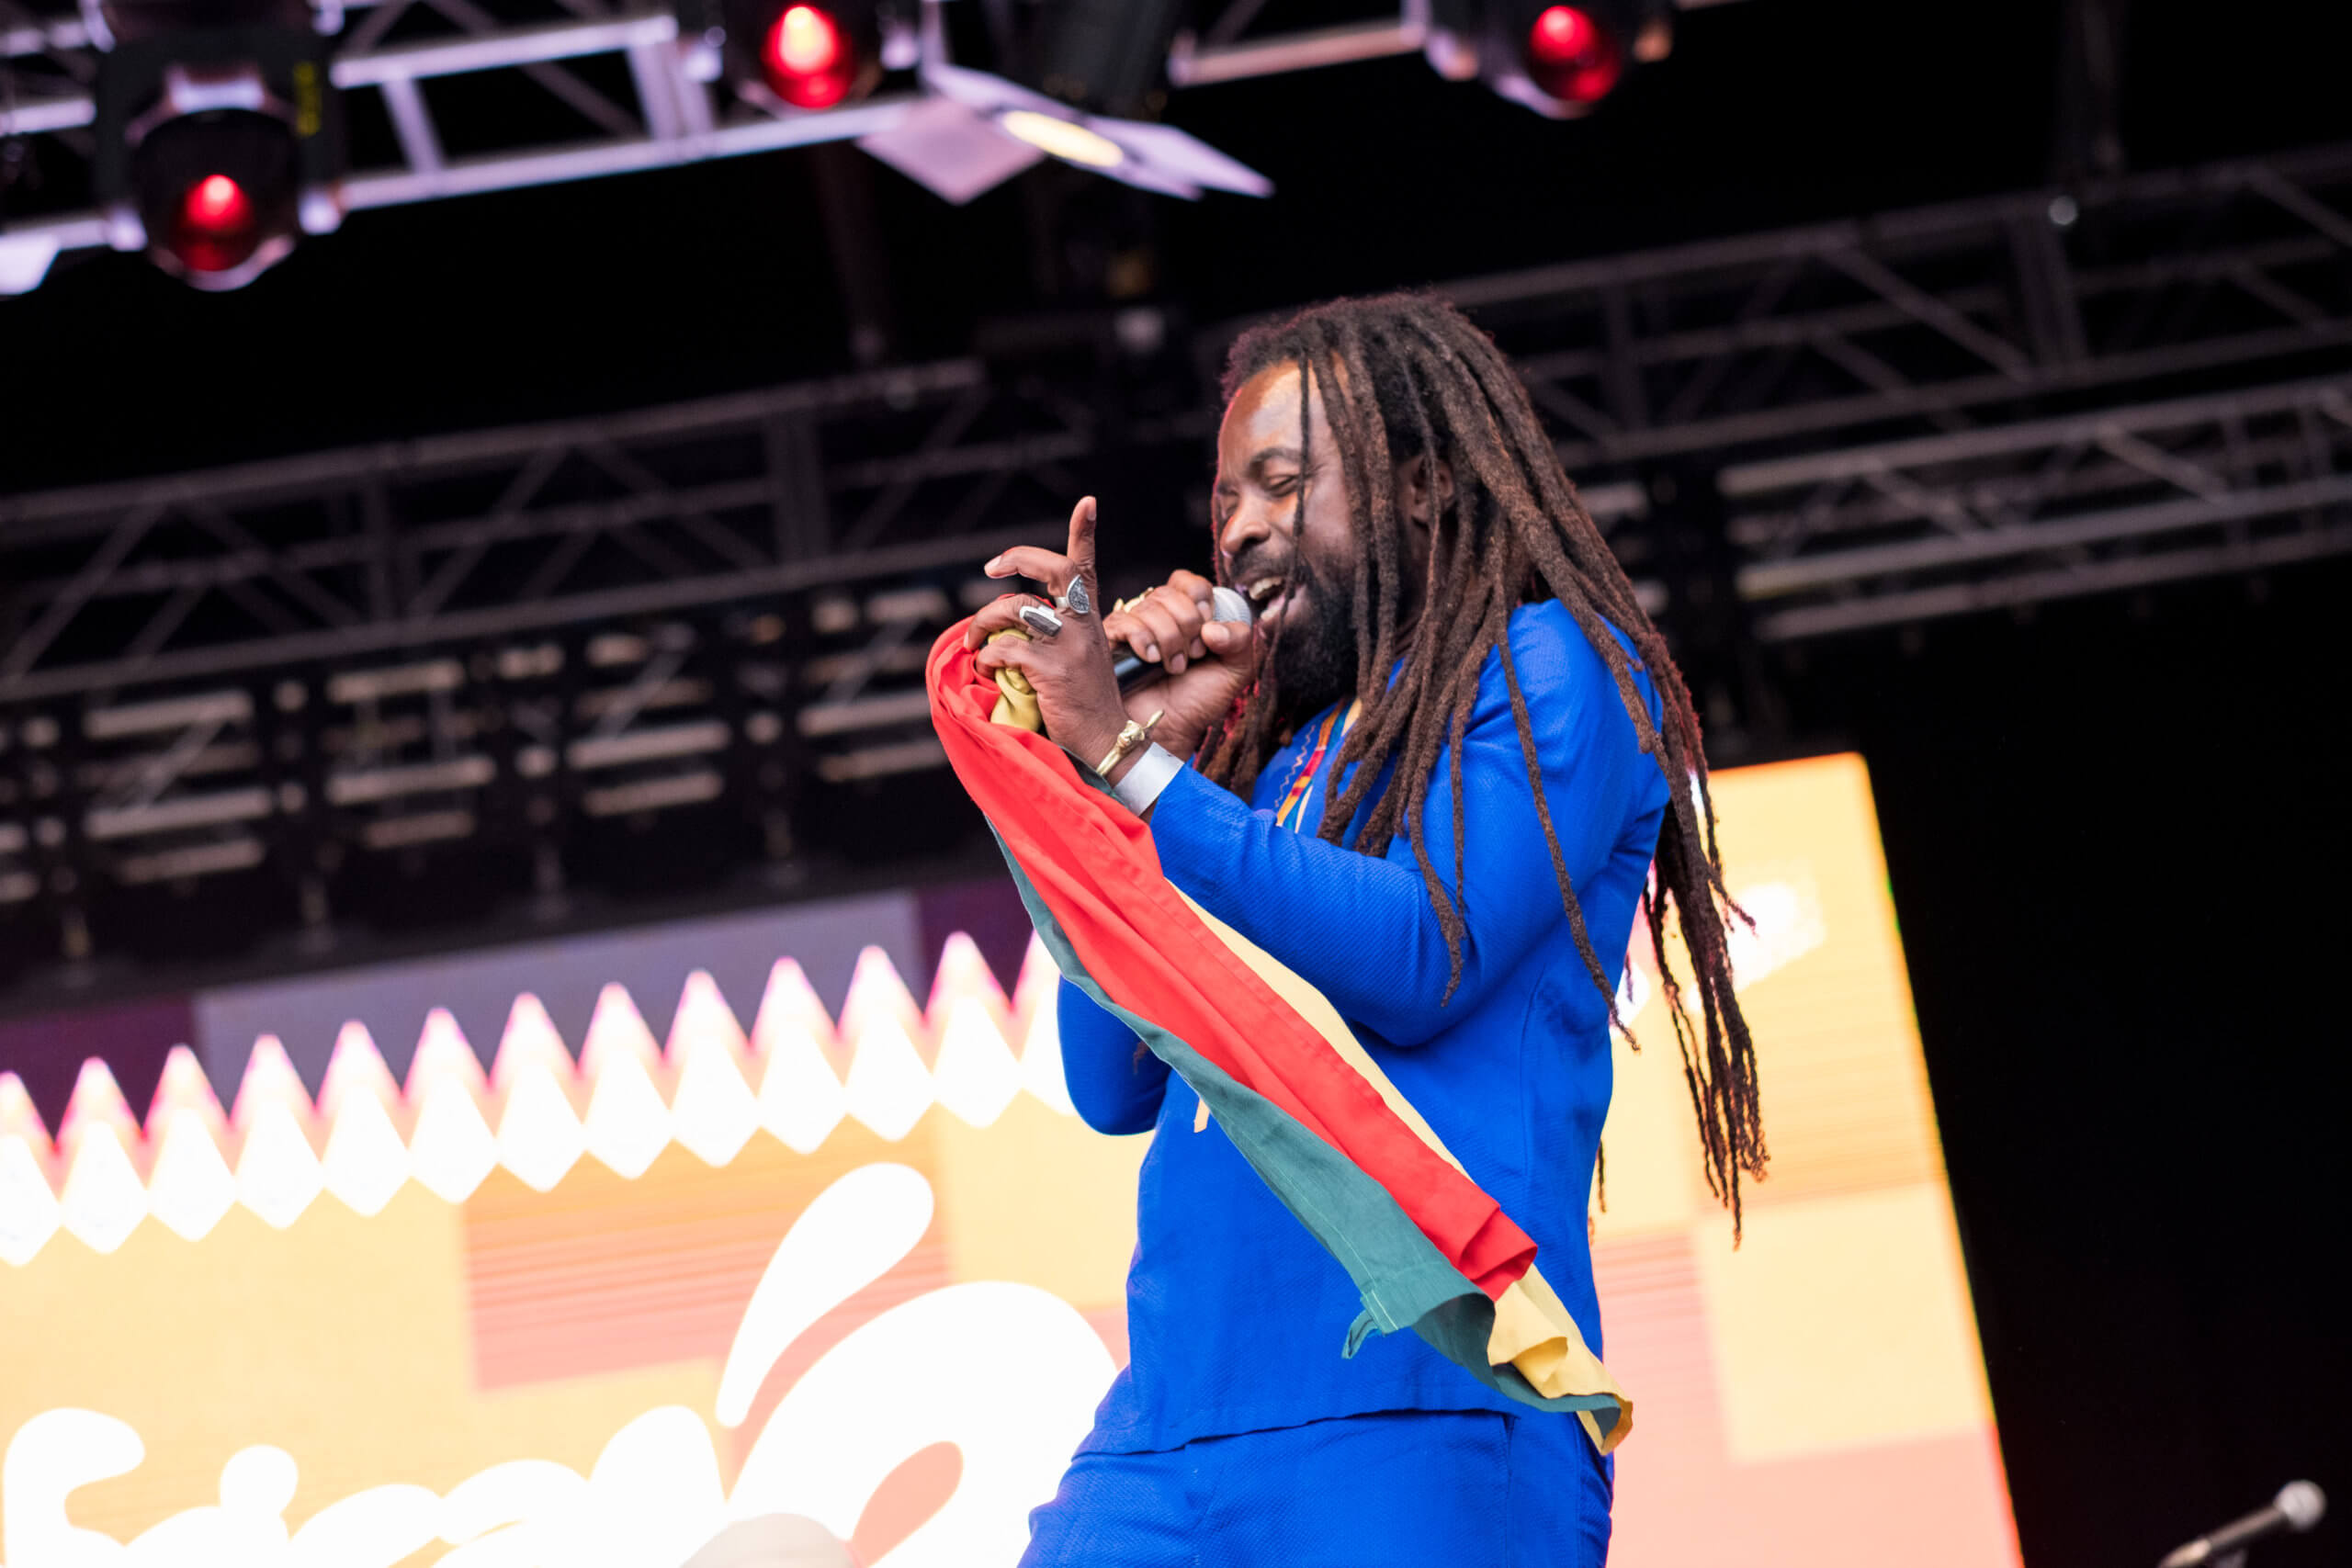 Rocky Dawuni on stage at the Africa Oyé festival in 2018. He is wearing blue clothing and is singing into a microphone.